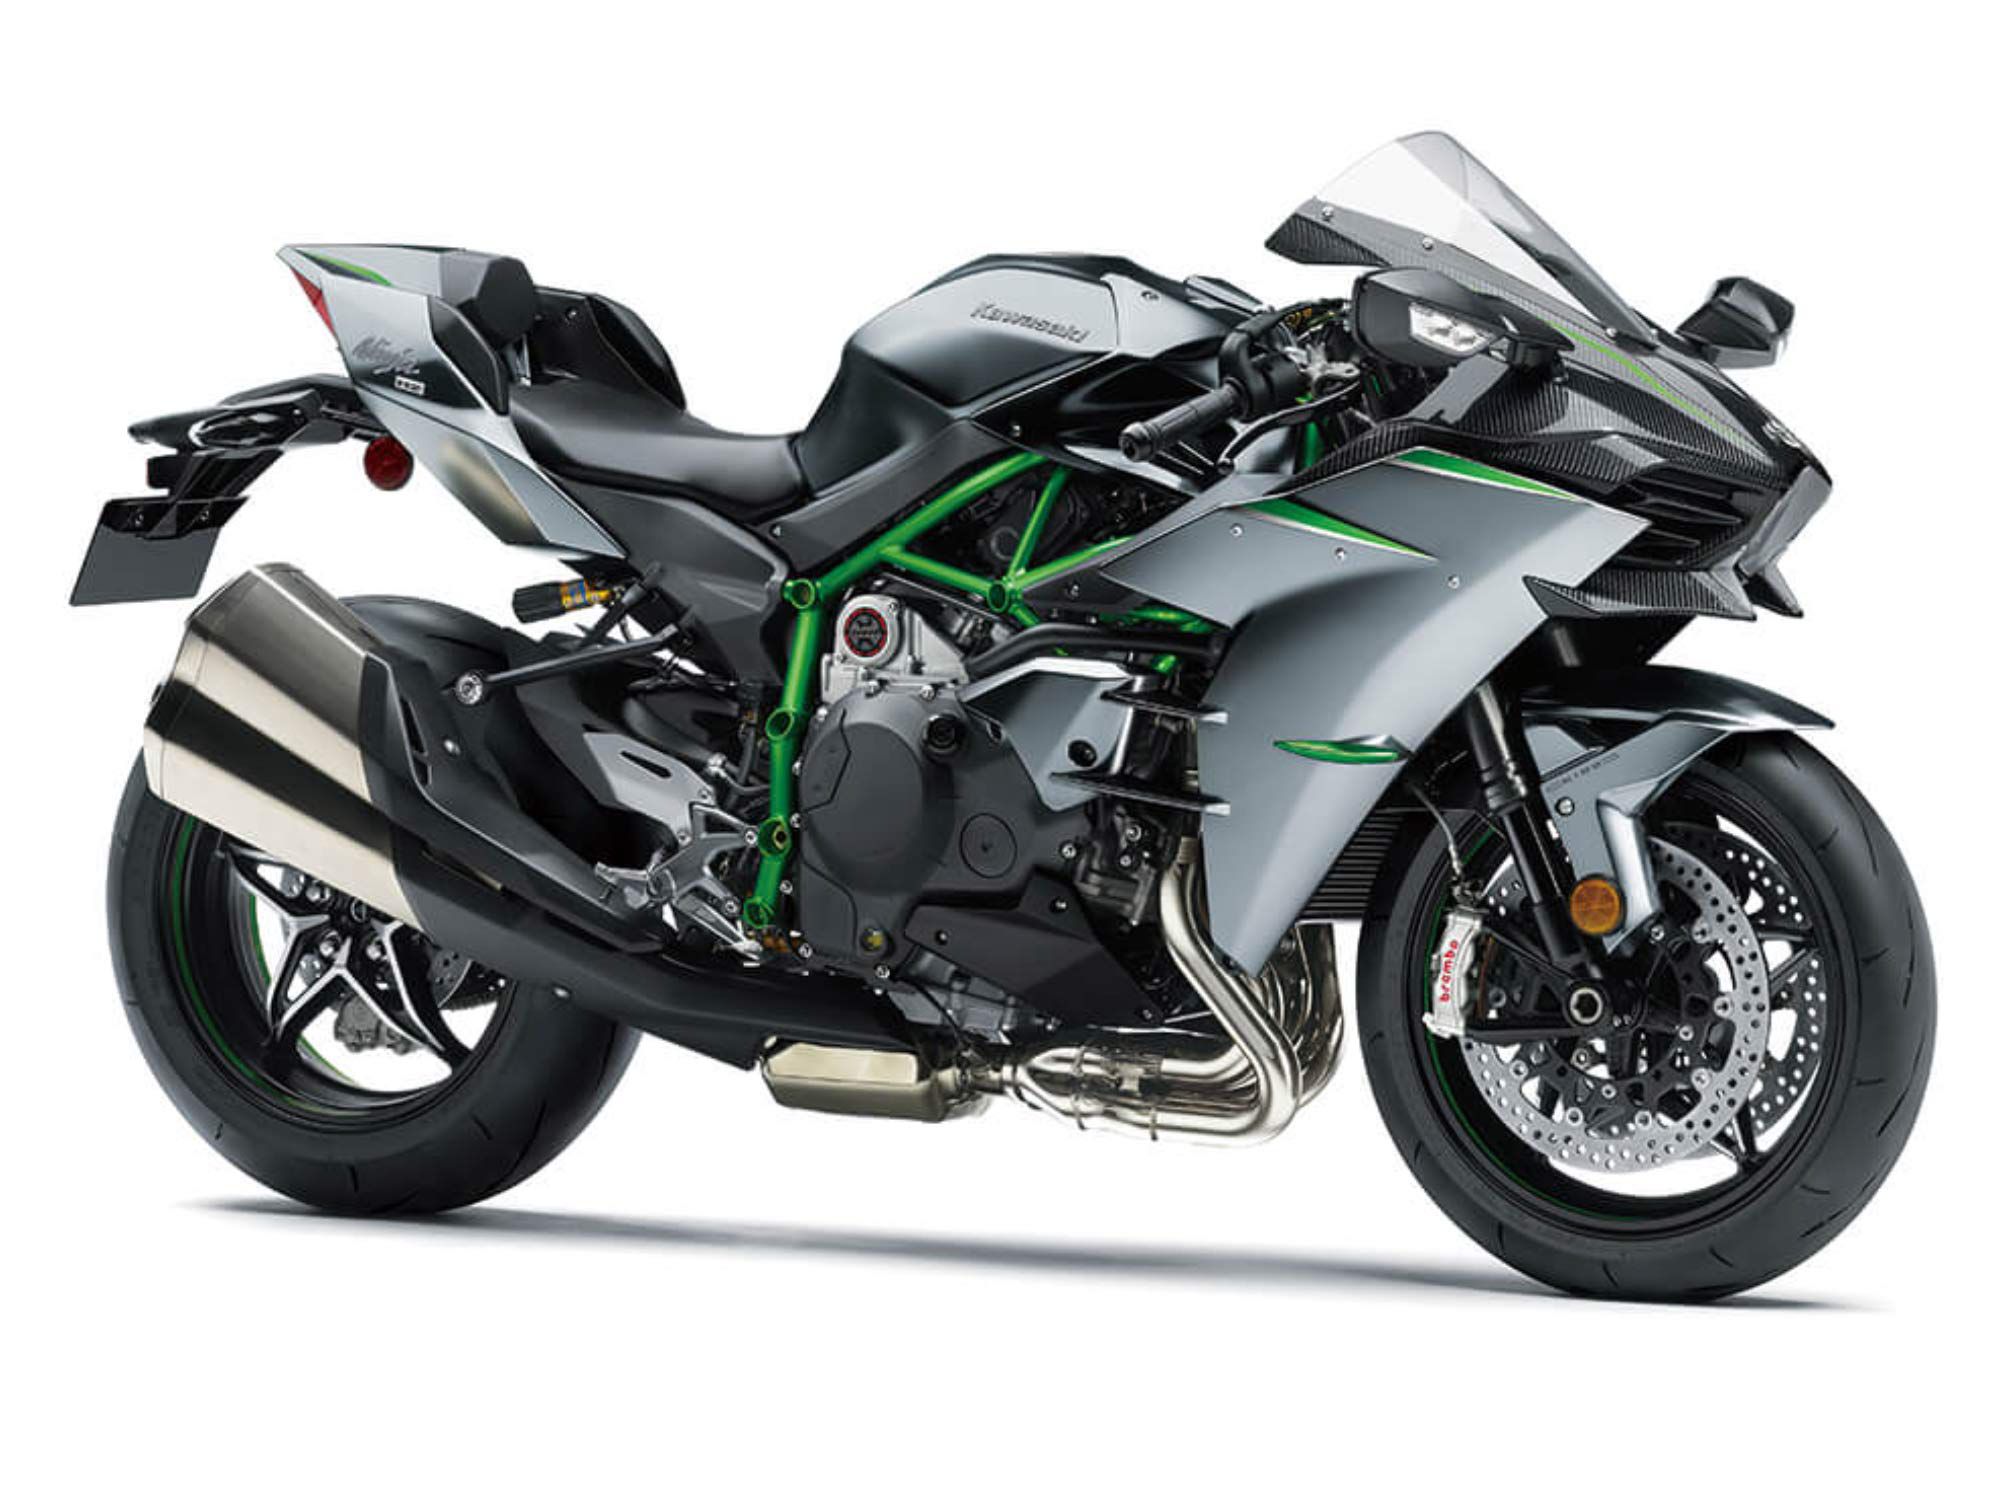 Still the only production supercharged motorcycle available, the Ninja H2 family is an exclusive one.